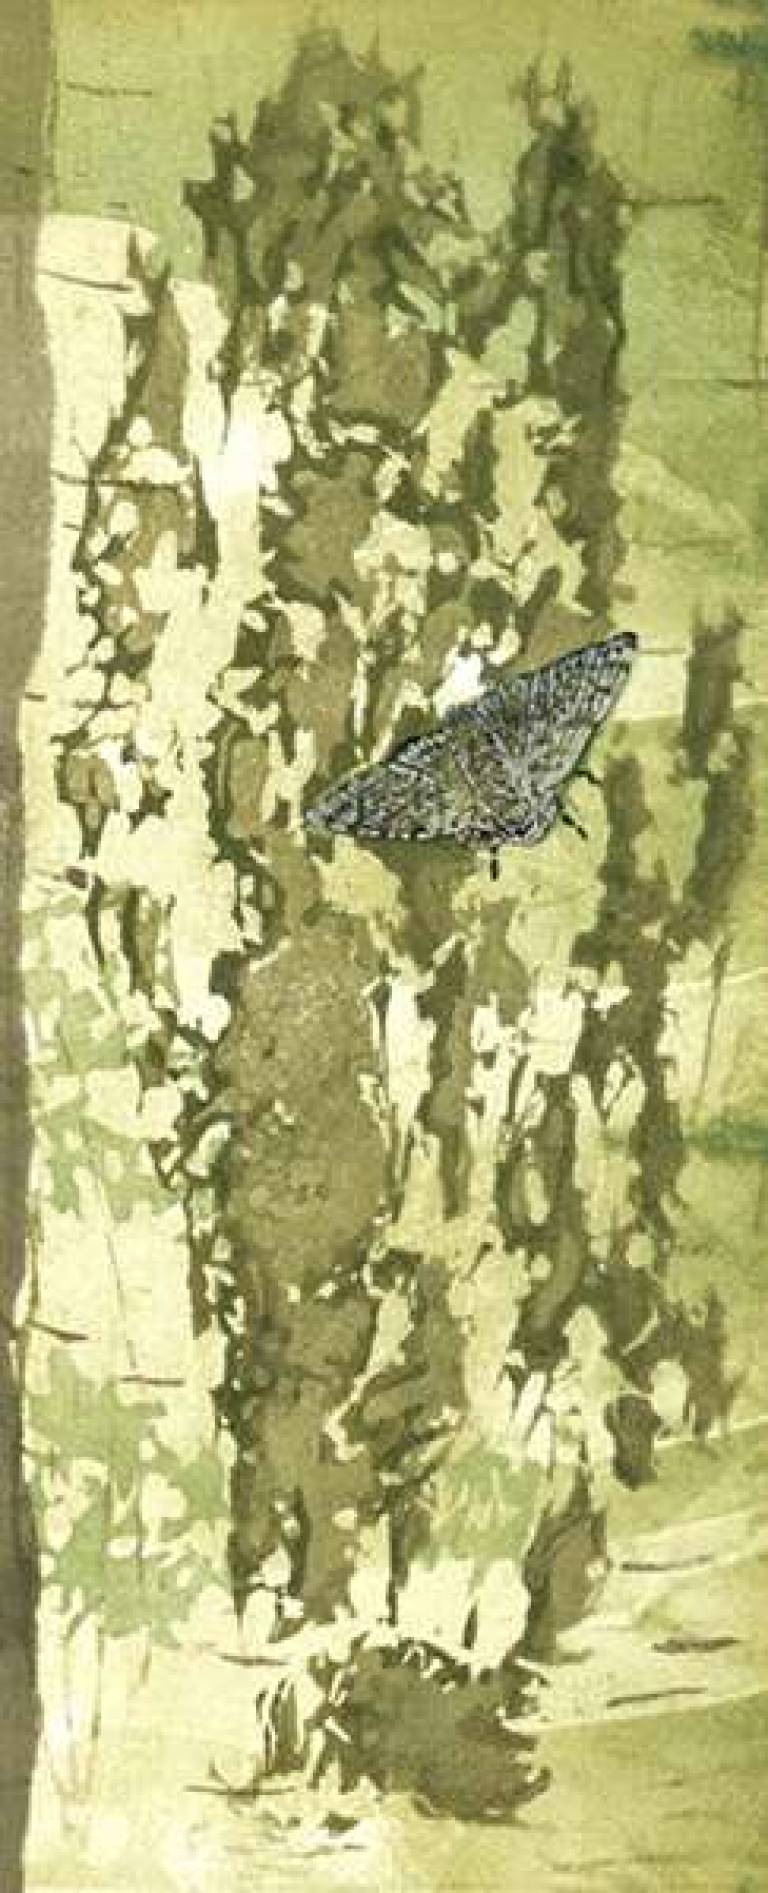 Thelma Sykes - Overlooked (Peppered Moth on Birch)